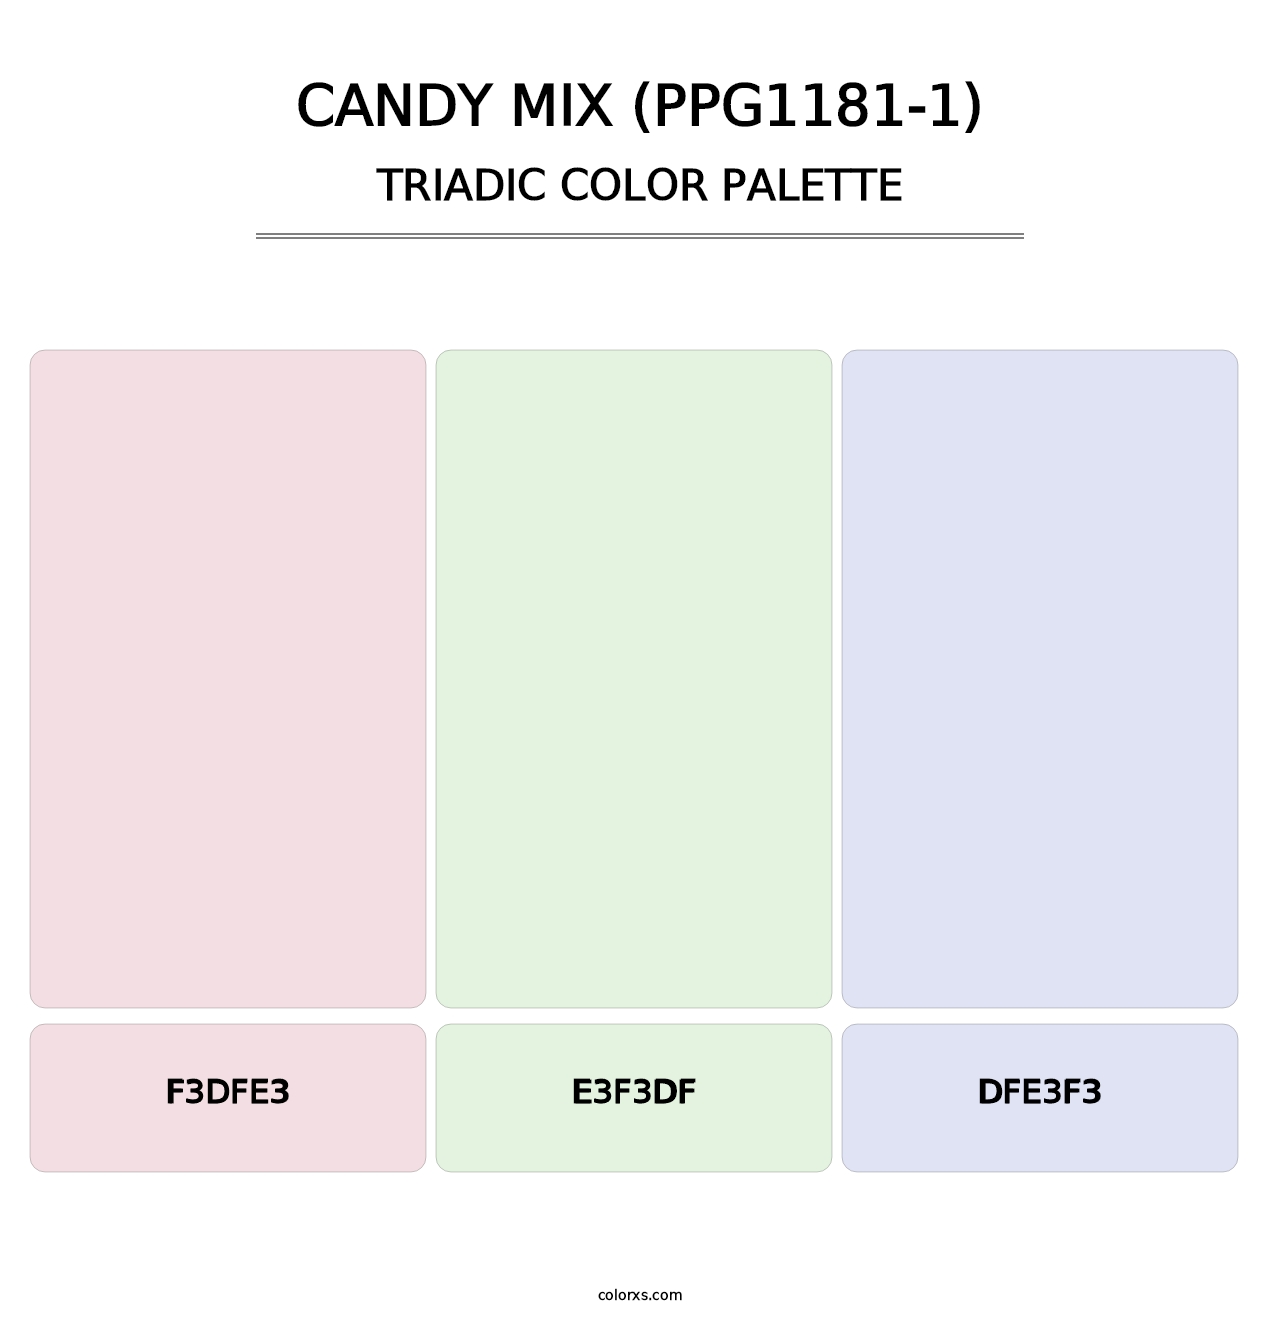 Candy Mix (PPG1181-1) - Triadic Color Palette